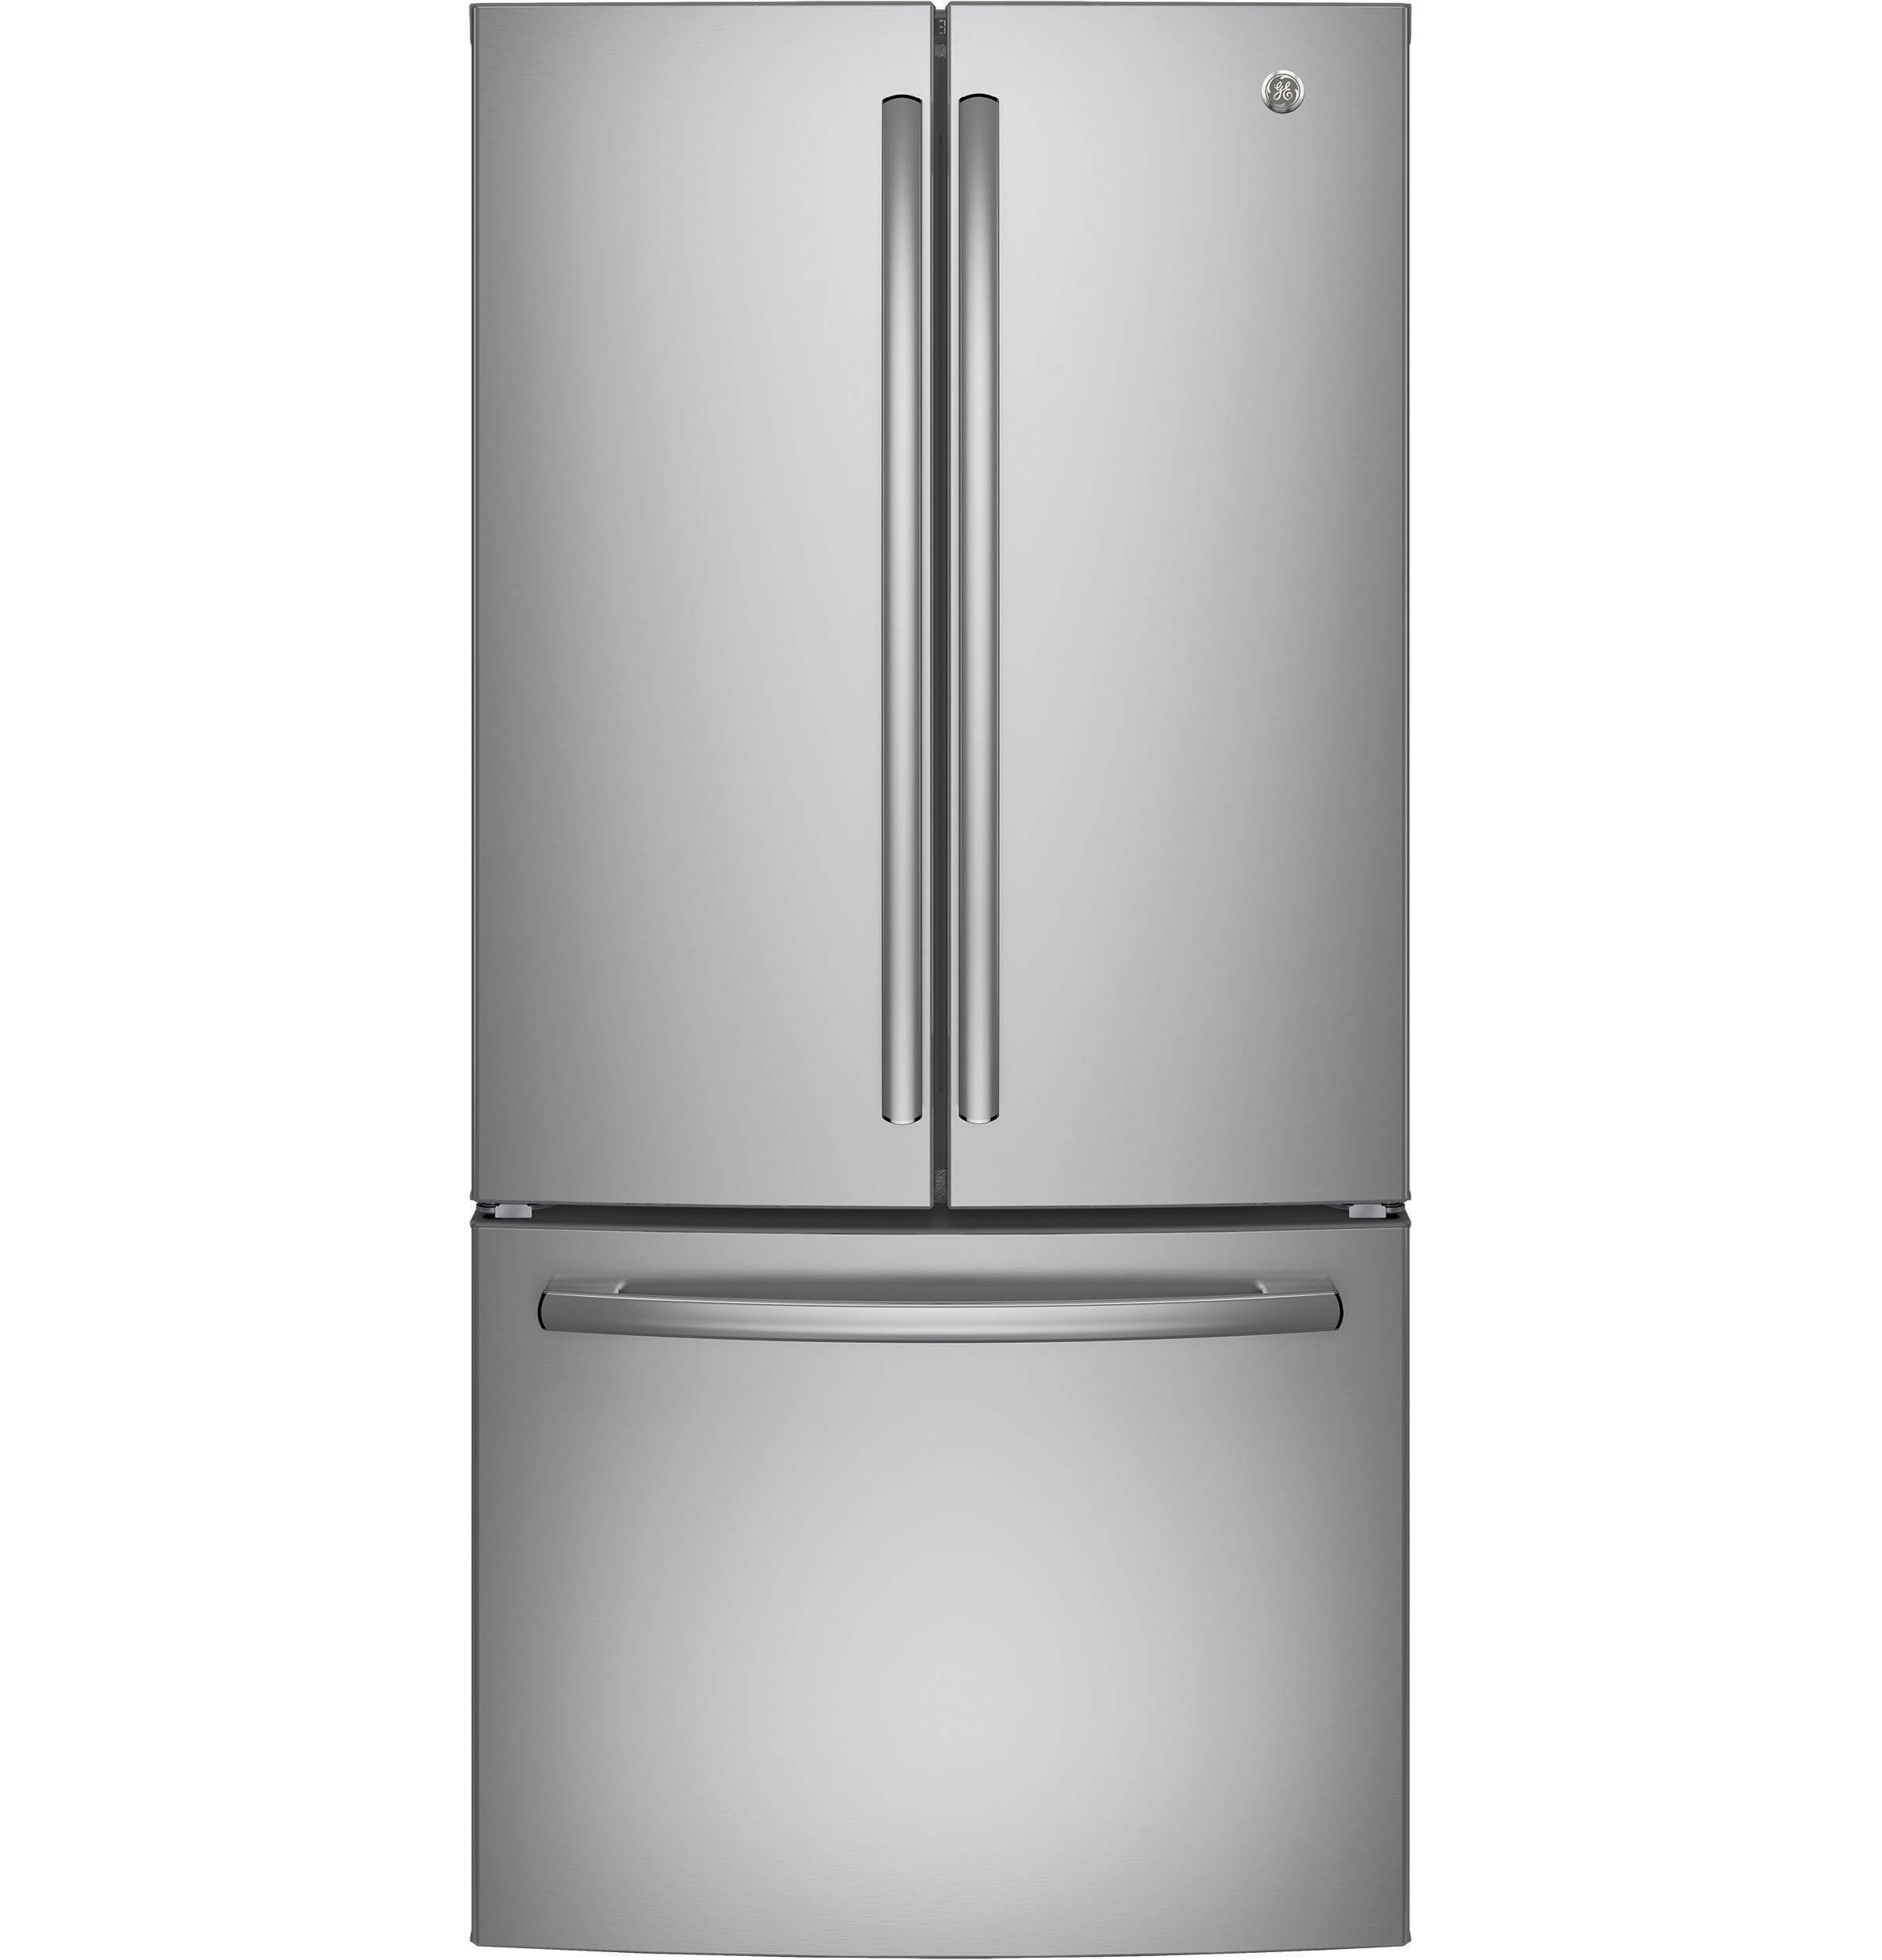 GE® ENERGY STAR® 18.6 Cu. Ft. Counter-Depth French-Door Refrigerator (Stainless Steel)